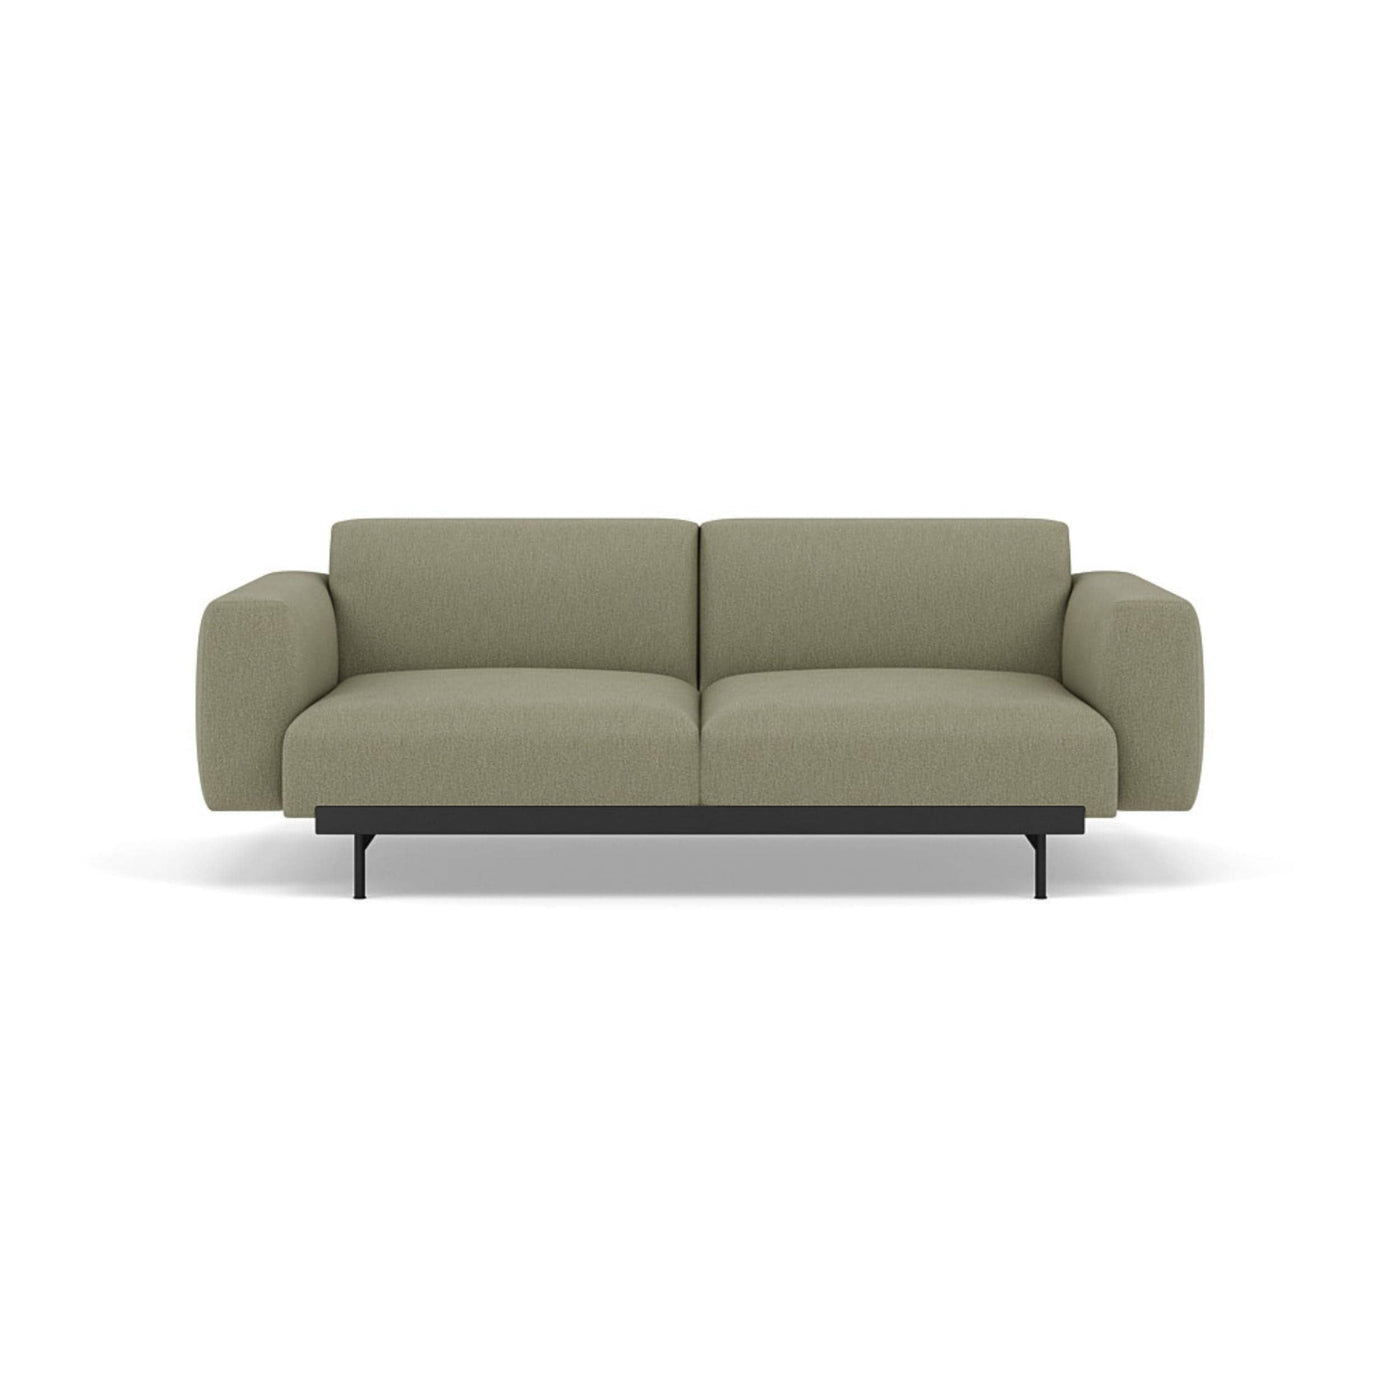 Muuto In Situ Modular 2 Seater Sofa, configuration 1 in clay 15 fabric. Made to order from someday designs #colour_clay-15